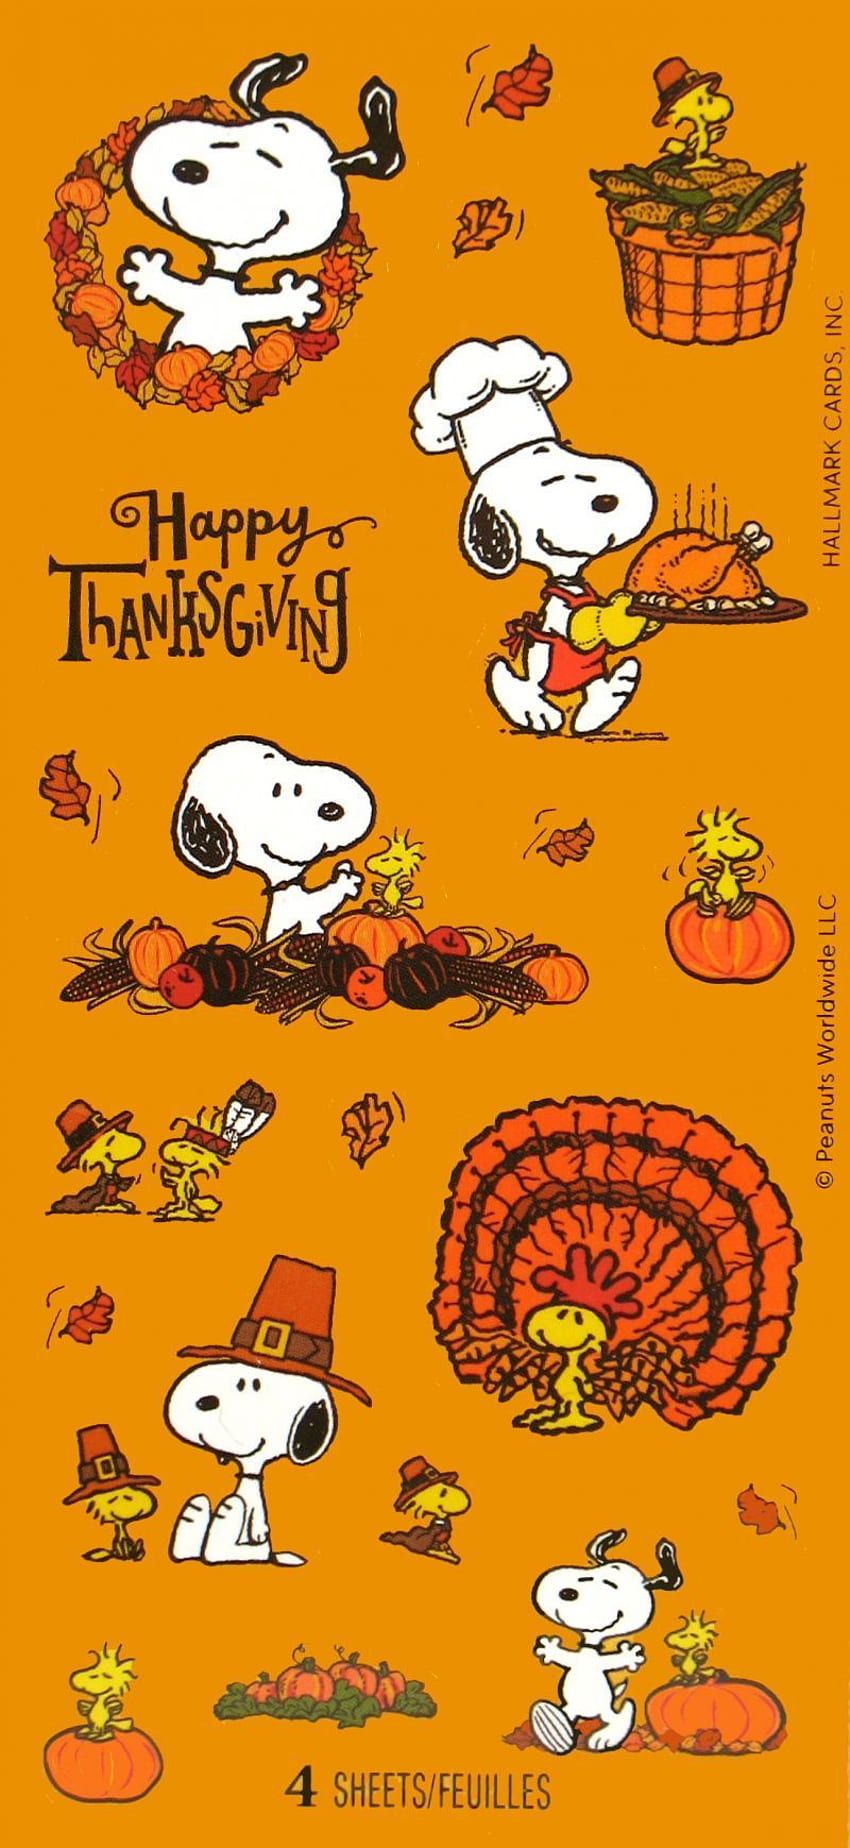 Snoopy Thanksgiving - , Snoopy Thanksgiving Background on Bat, Snoopy Peanuts HD phone wallpaper